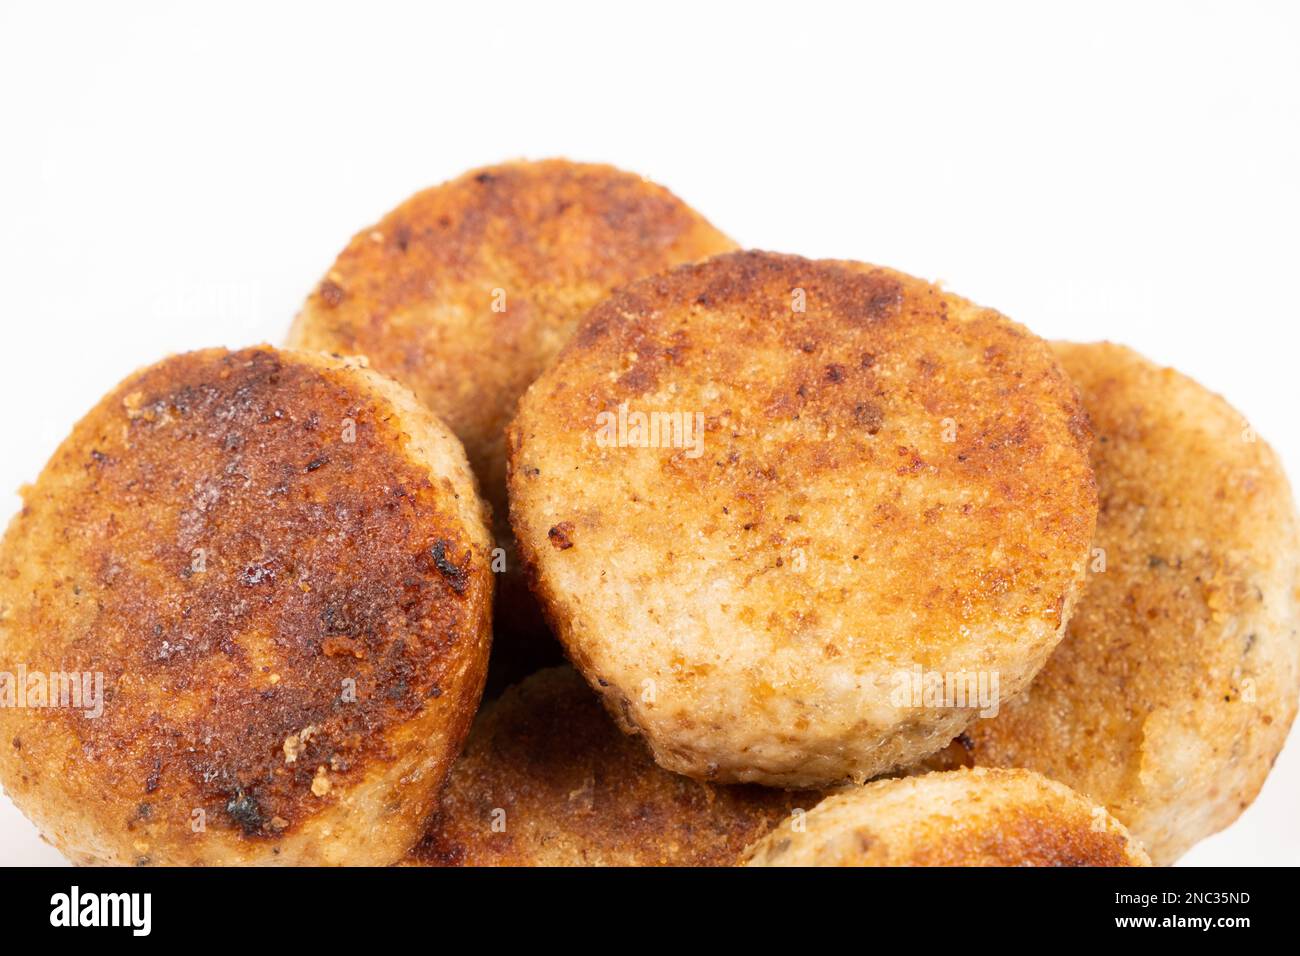 Fried homemade fish cutlets on a white background, close-up, recipe for fish cutlets. Stock Photo